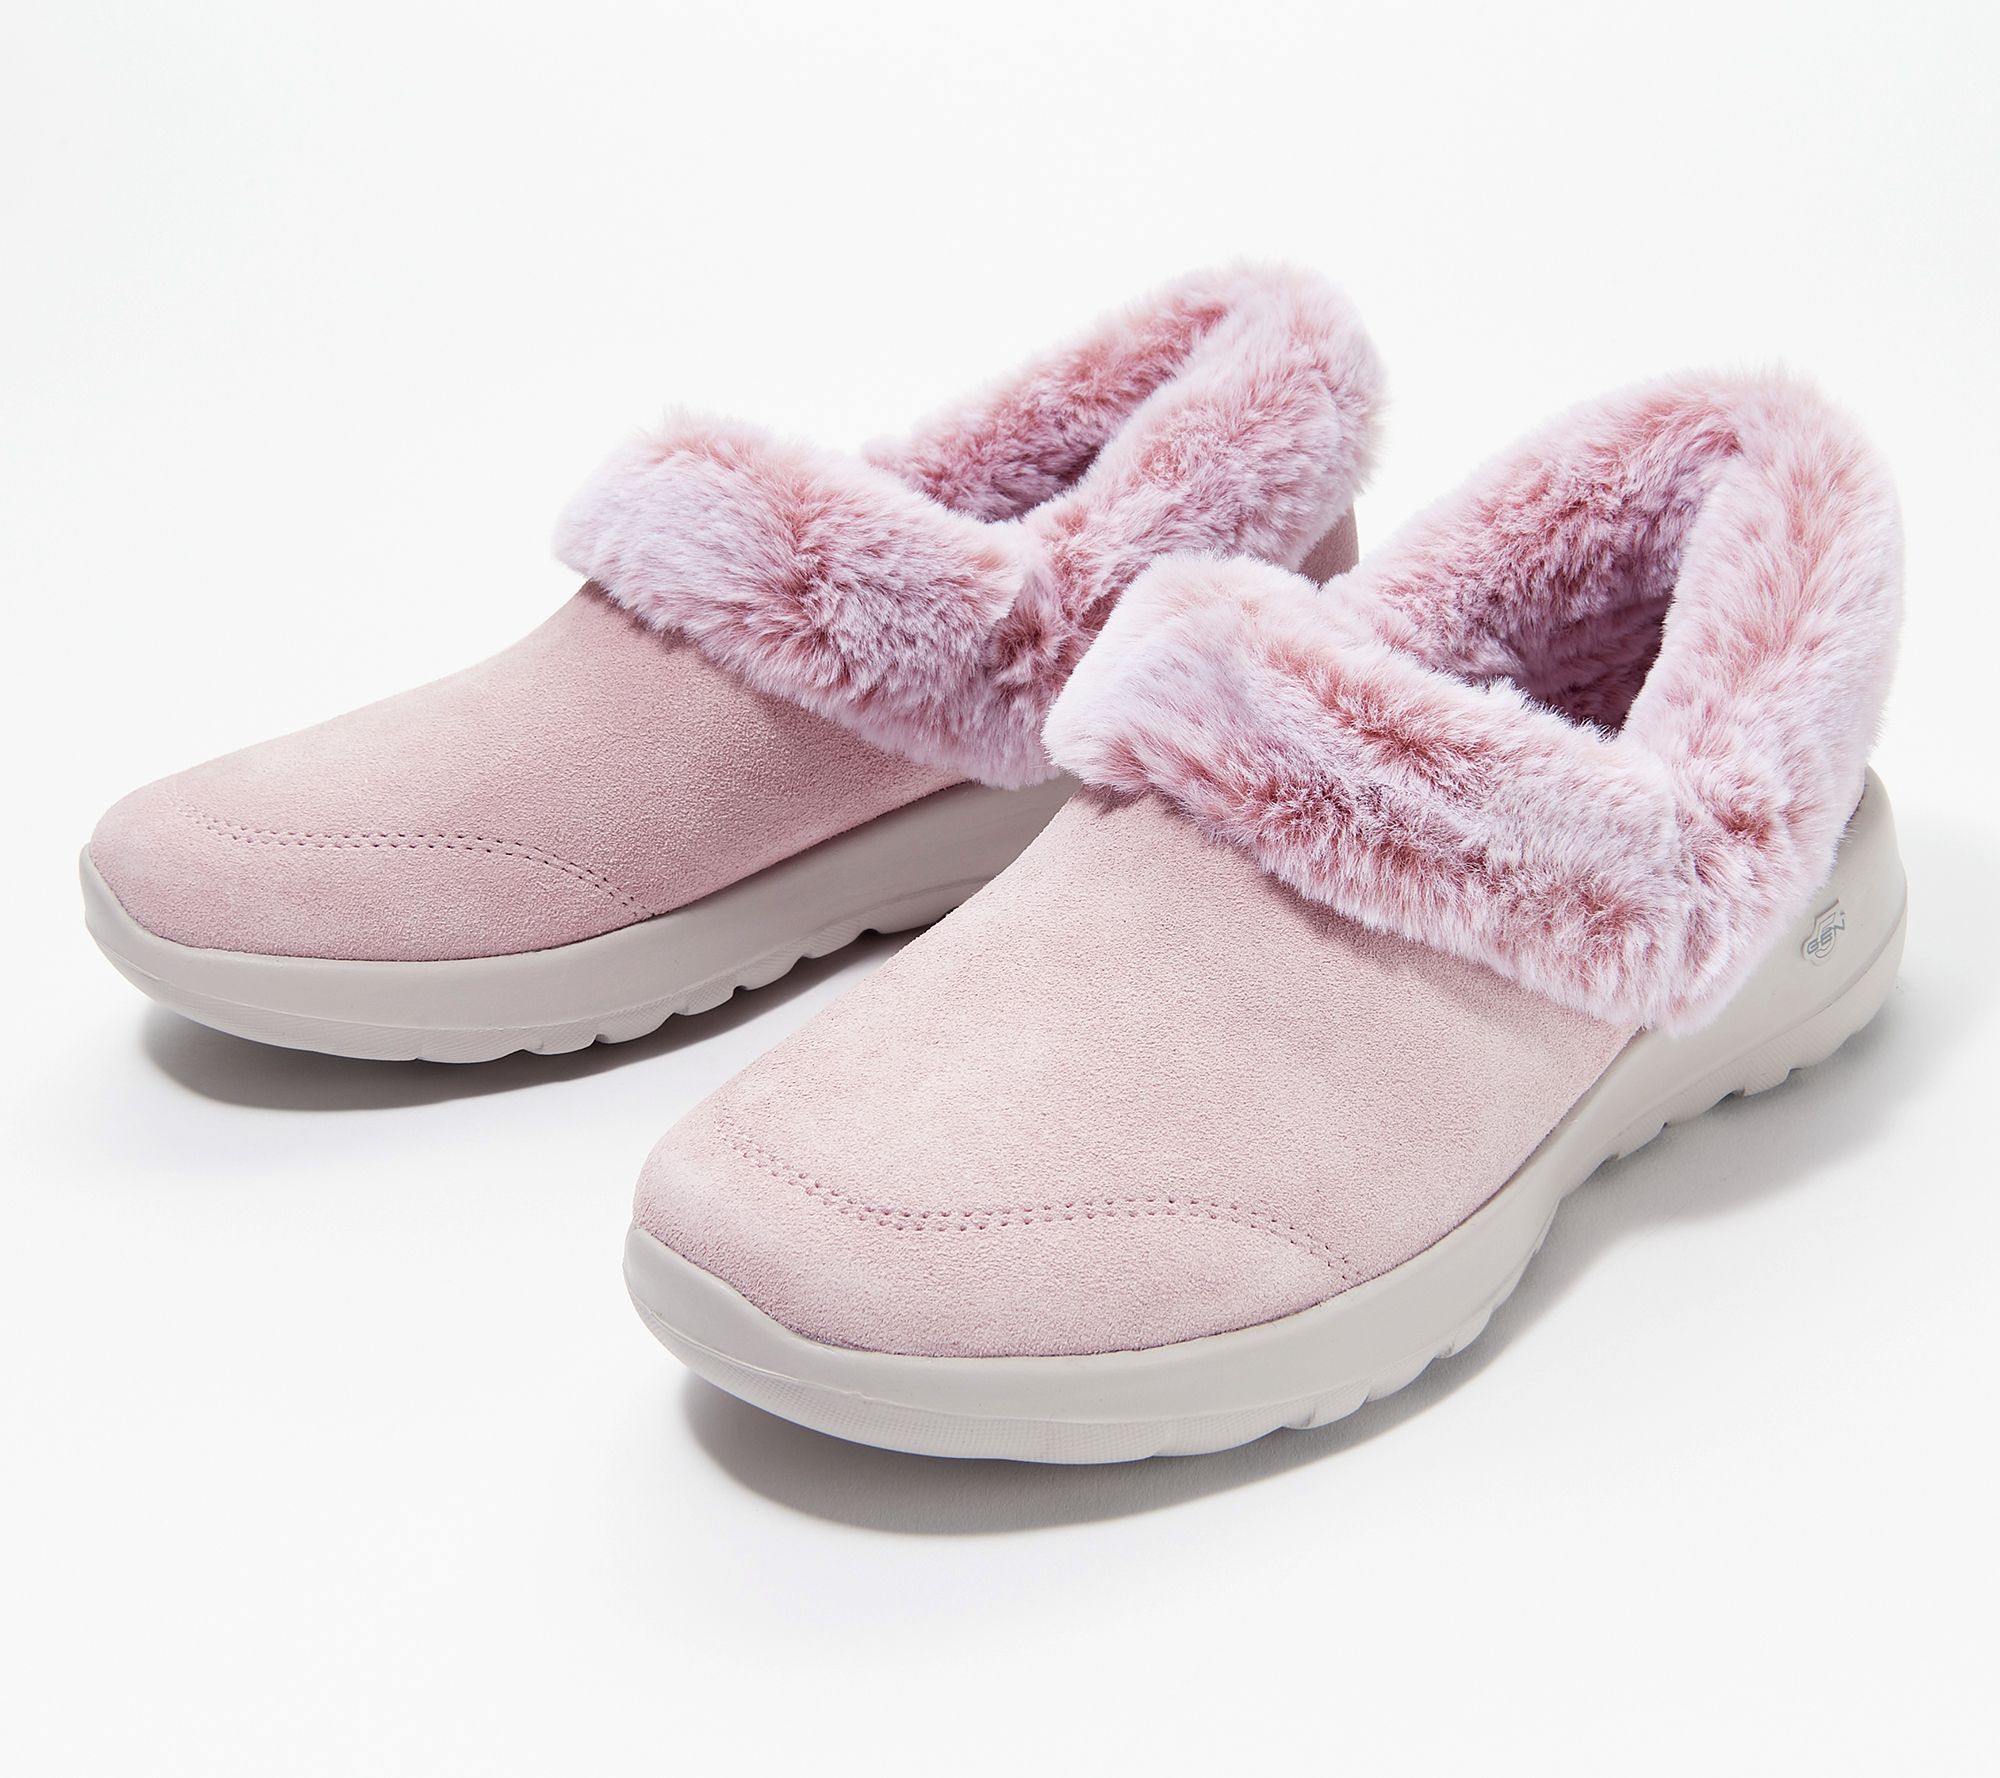 Skechers On-The-Go Joy Suede and Faux Fur Slip-Ons - Cozy Life, Size 7 Medium, Mauve